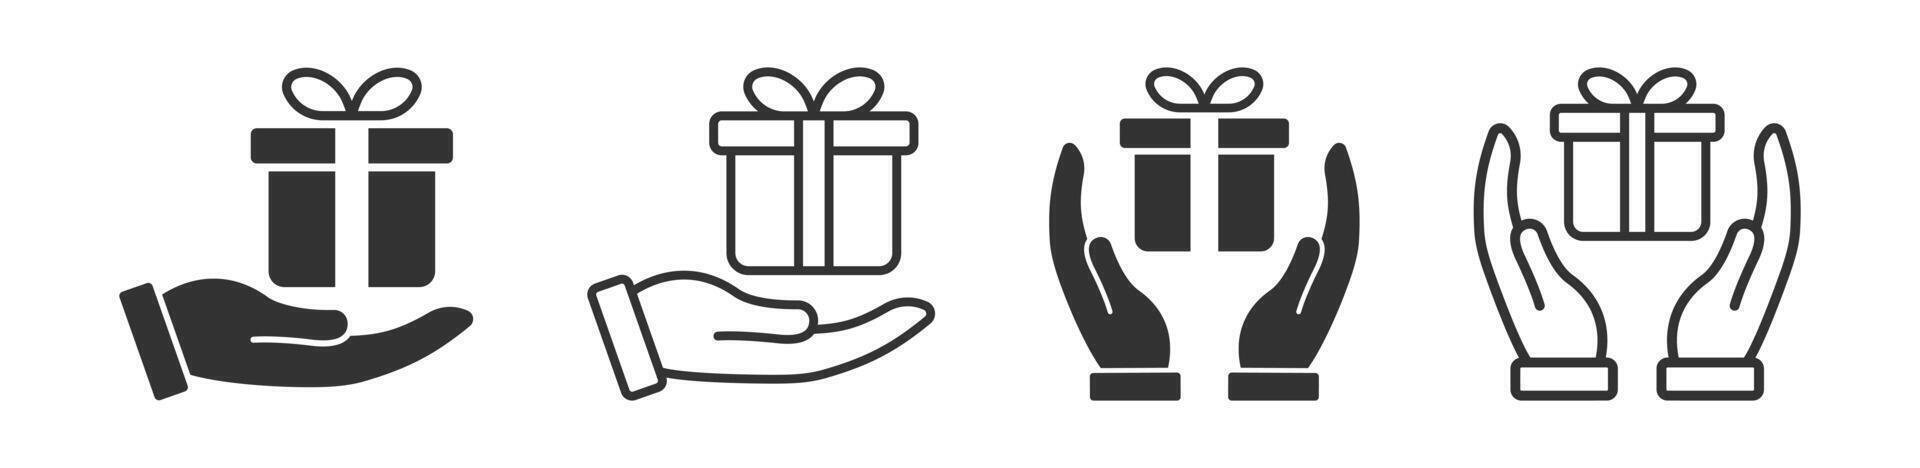 Hand holding surprise icon. Christmas, birthday present. Box with ribbon. Celebration sign. vector